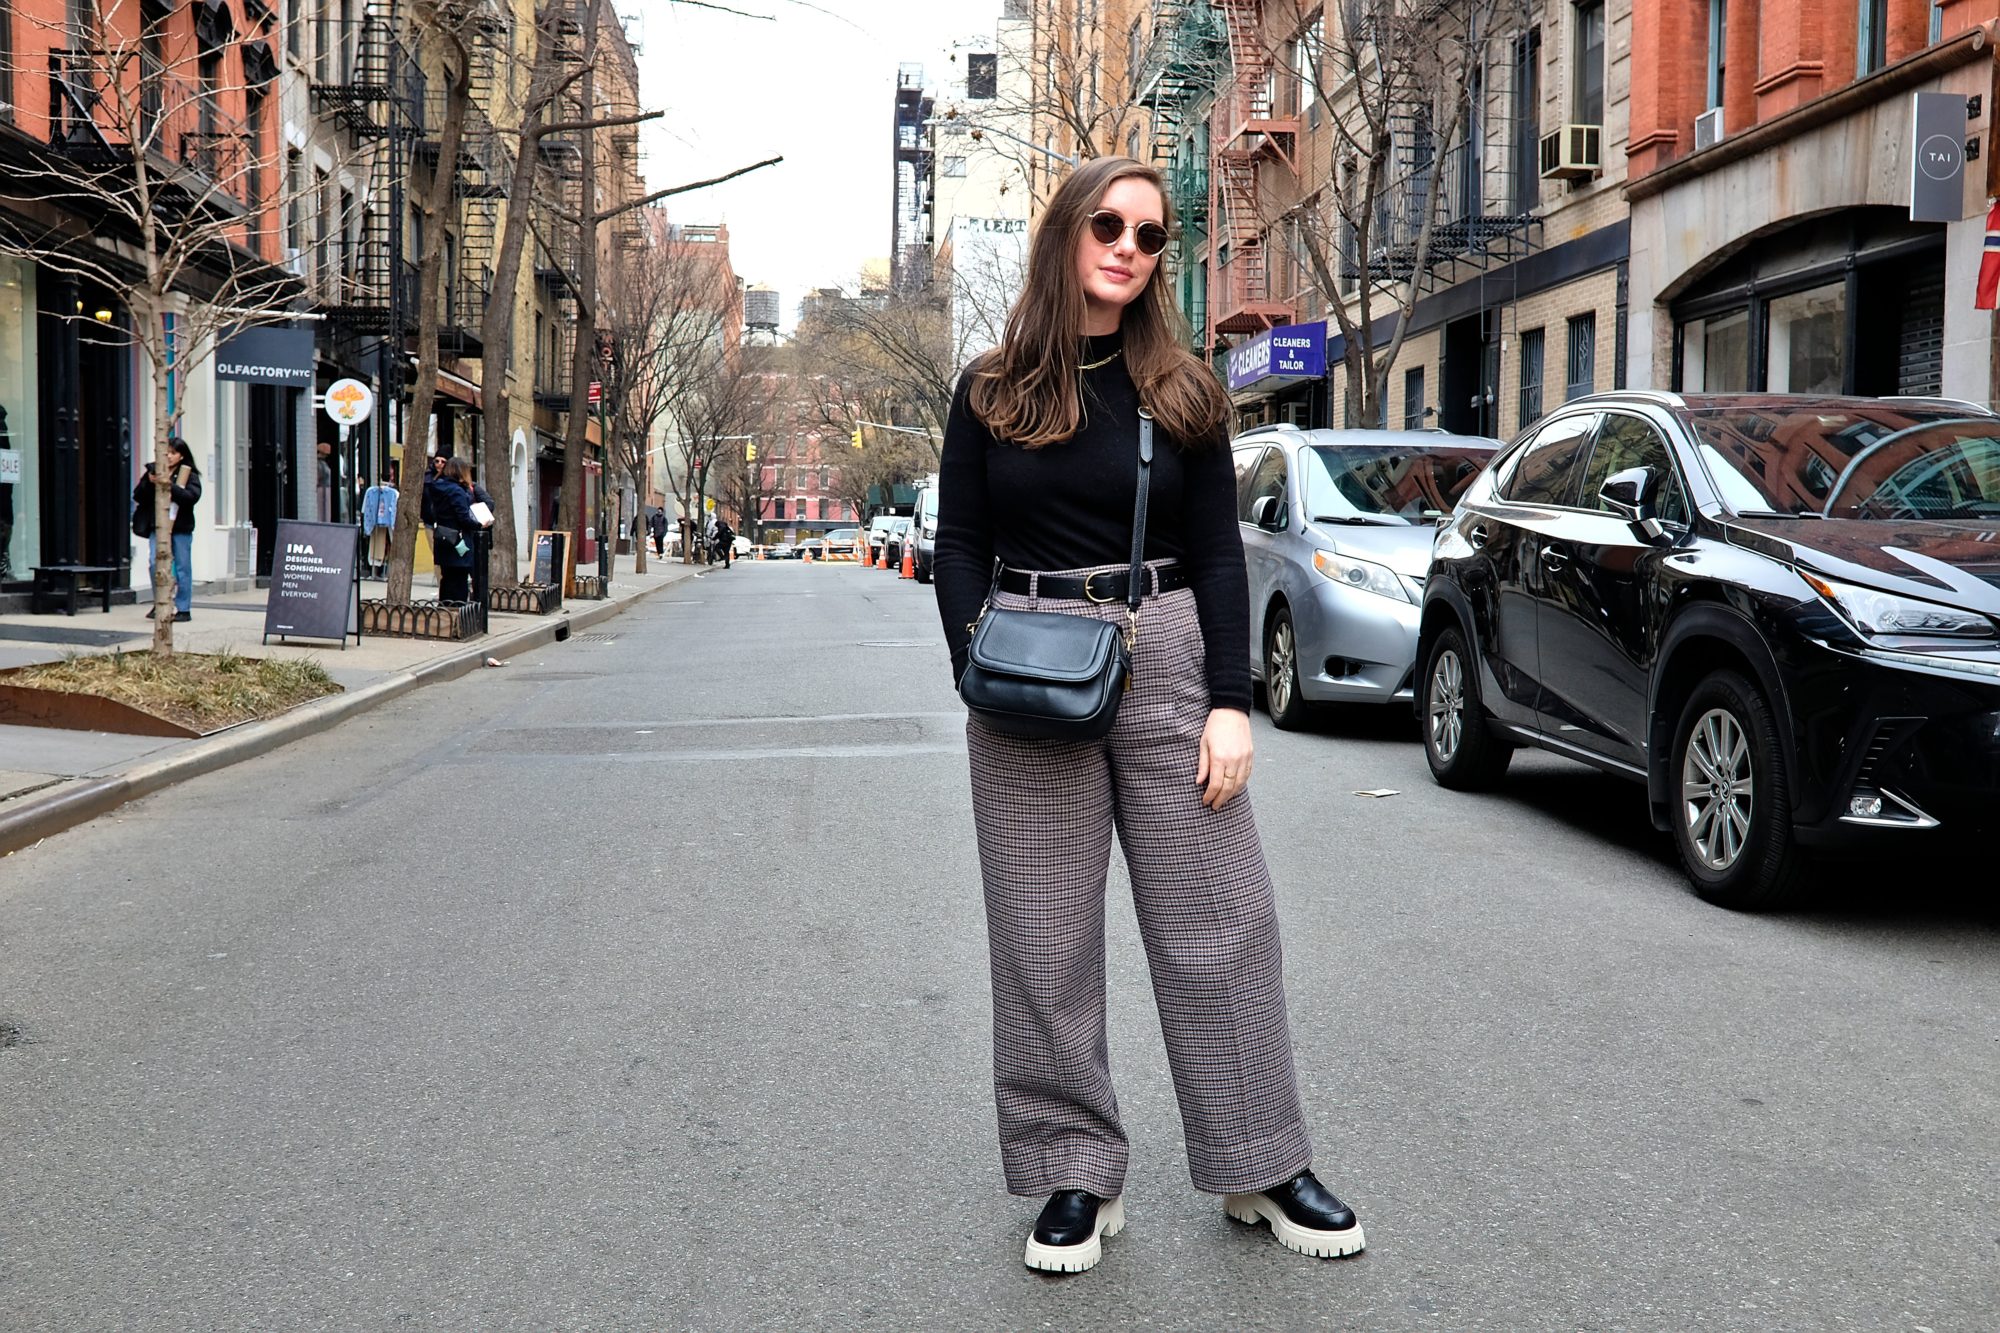 Alyssa stands on a street in NYC wearing a black sweater and wool pants